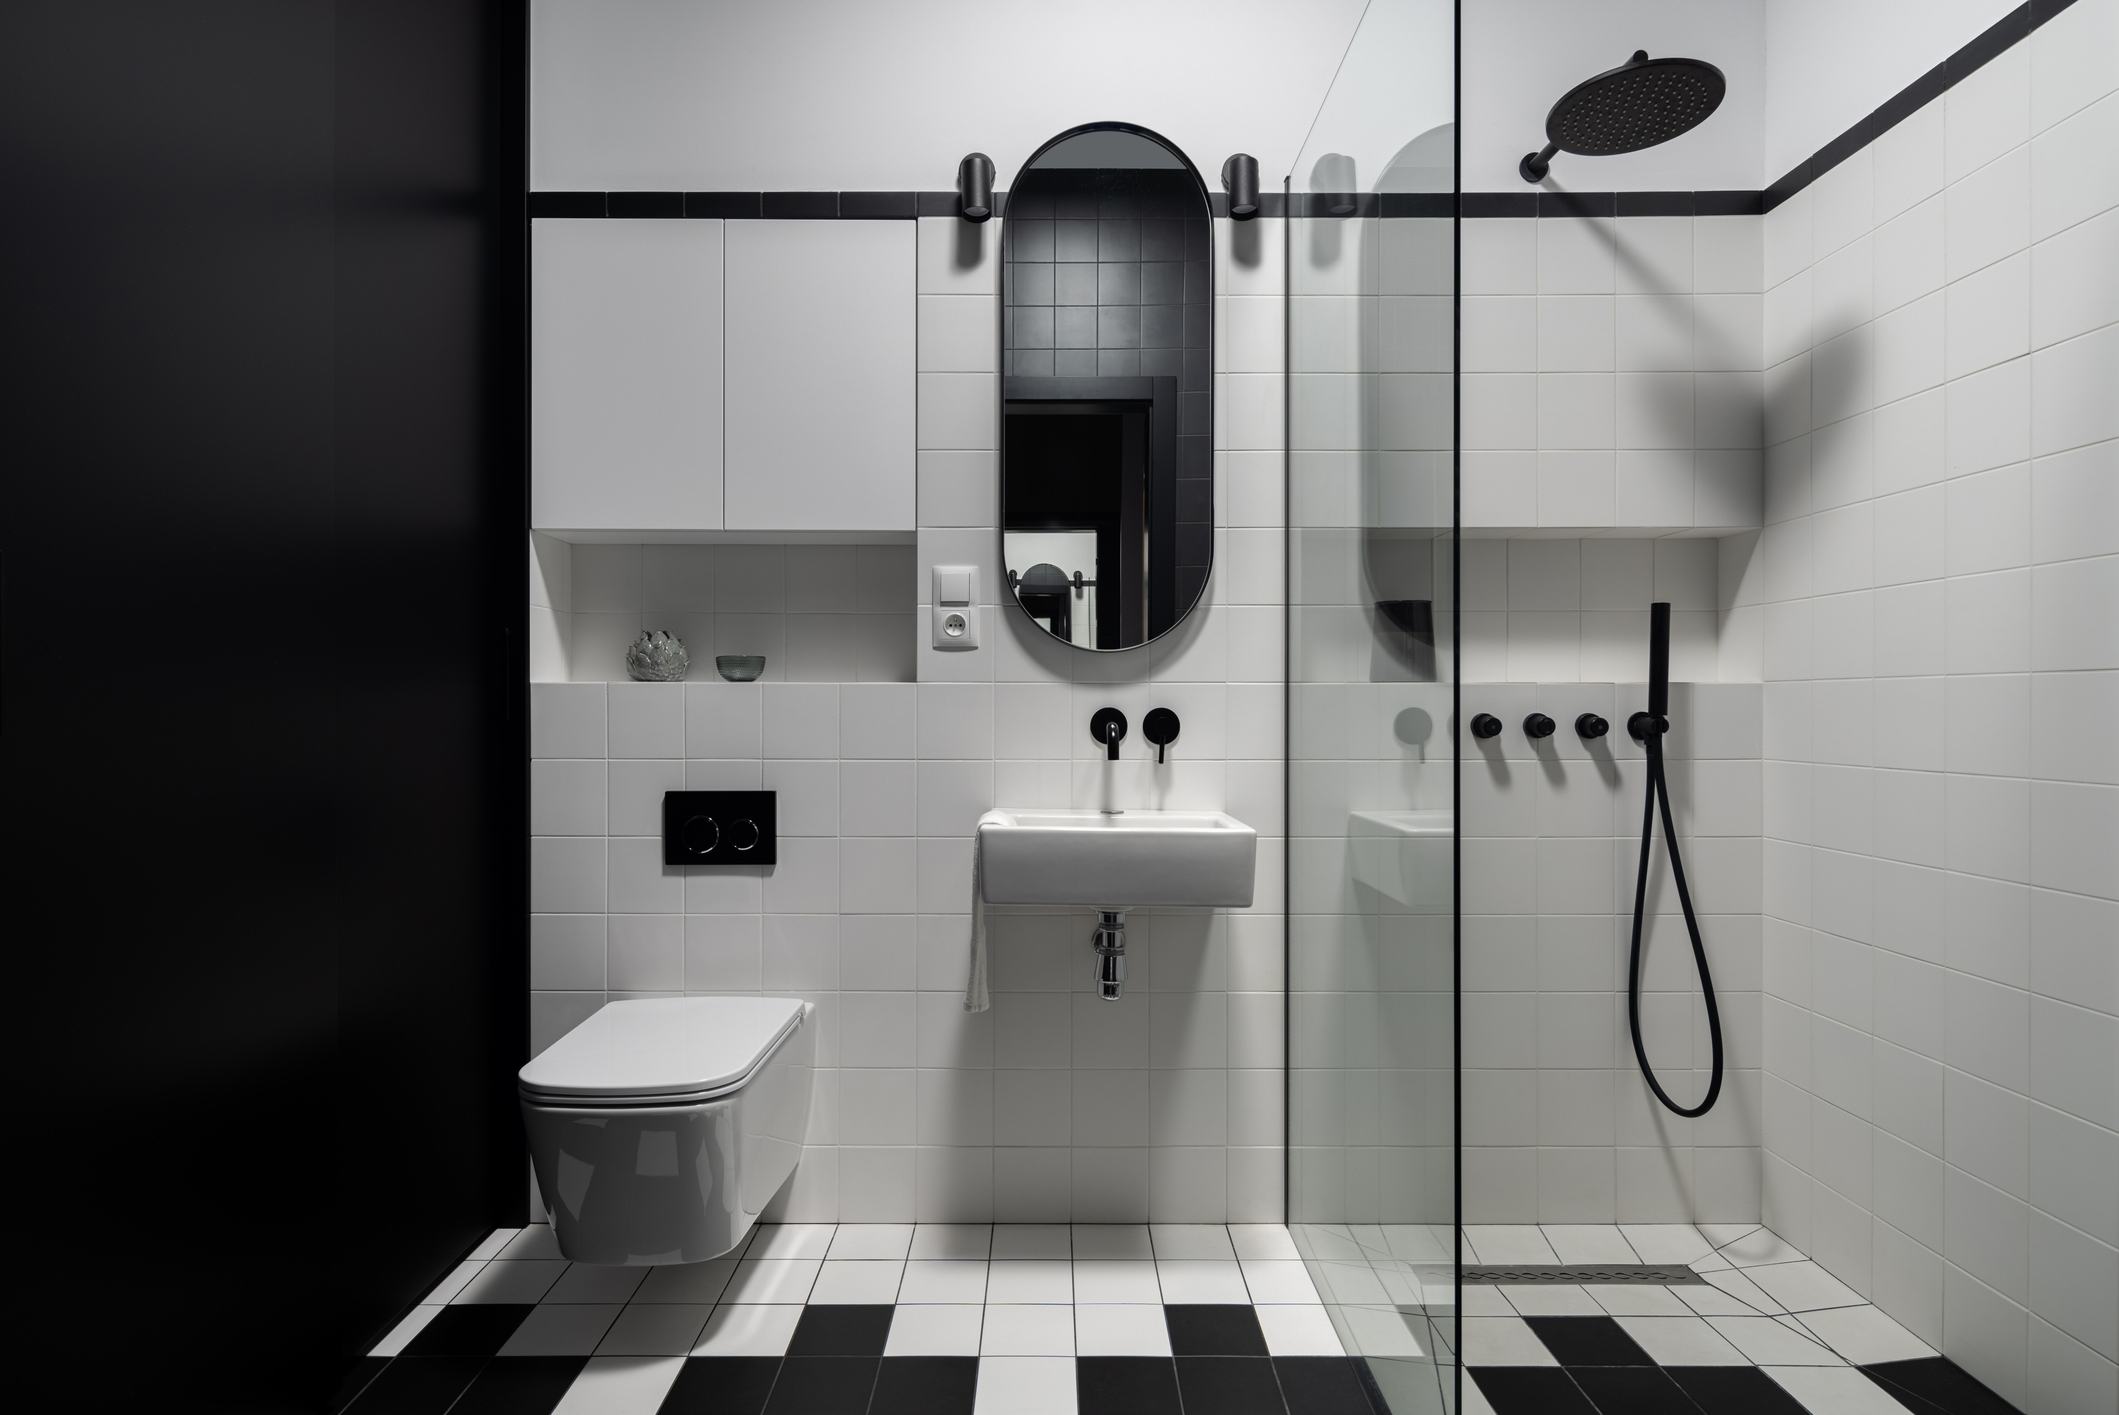 Black and white modern bathroom with square tiles and black accent fixtures.